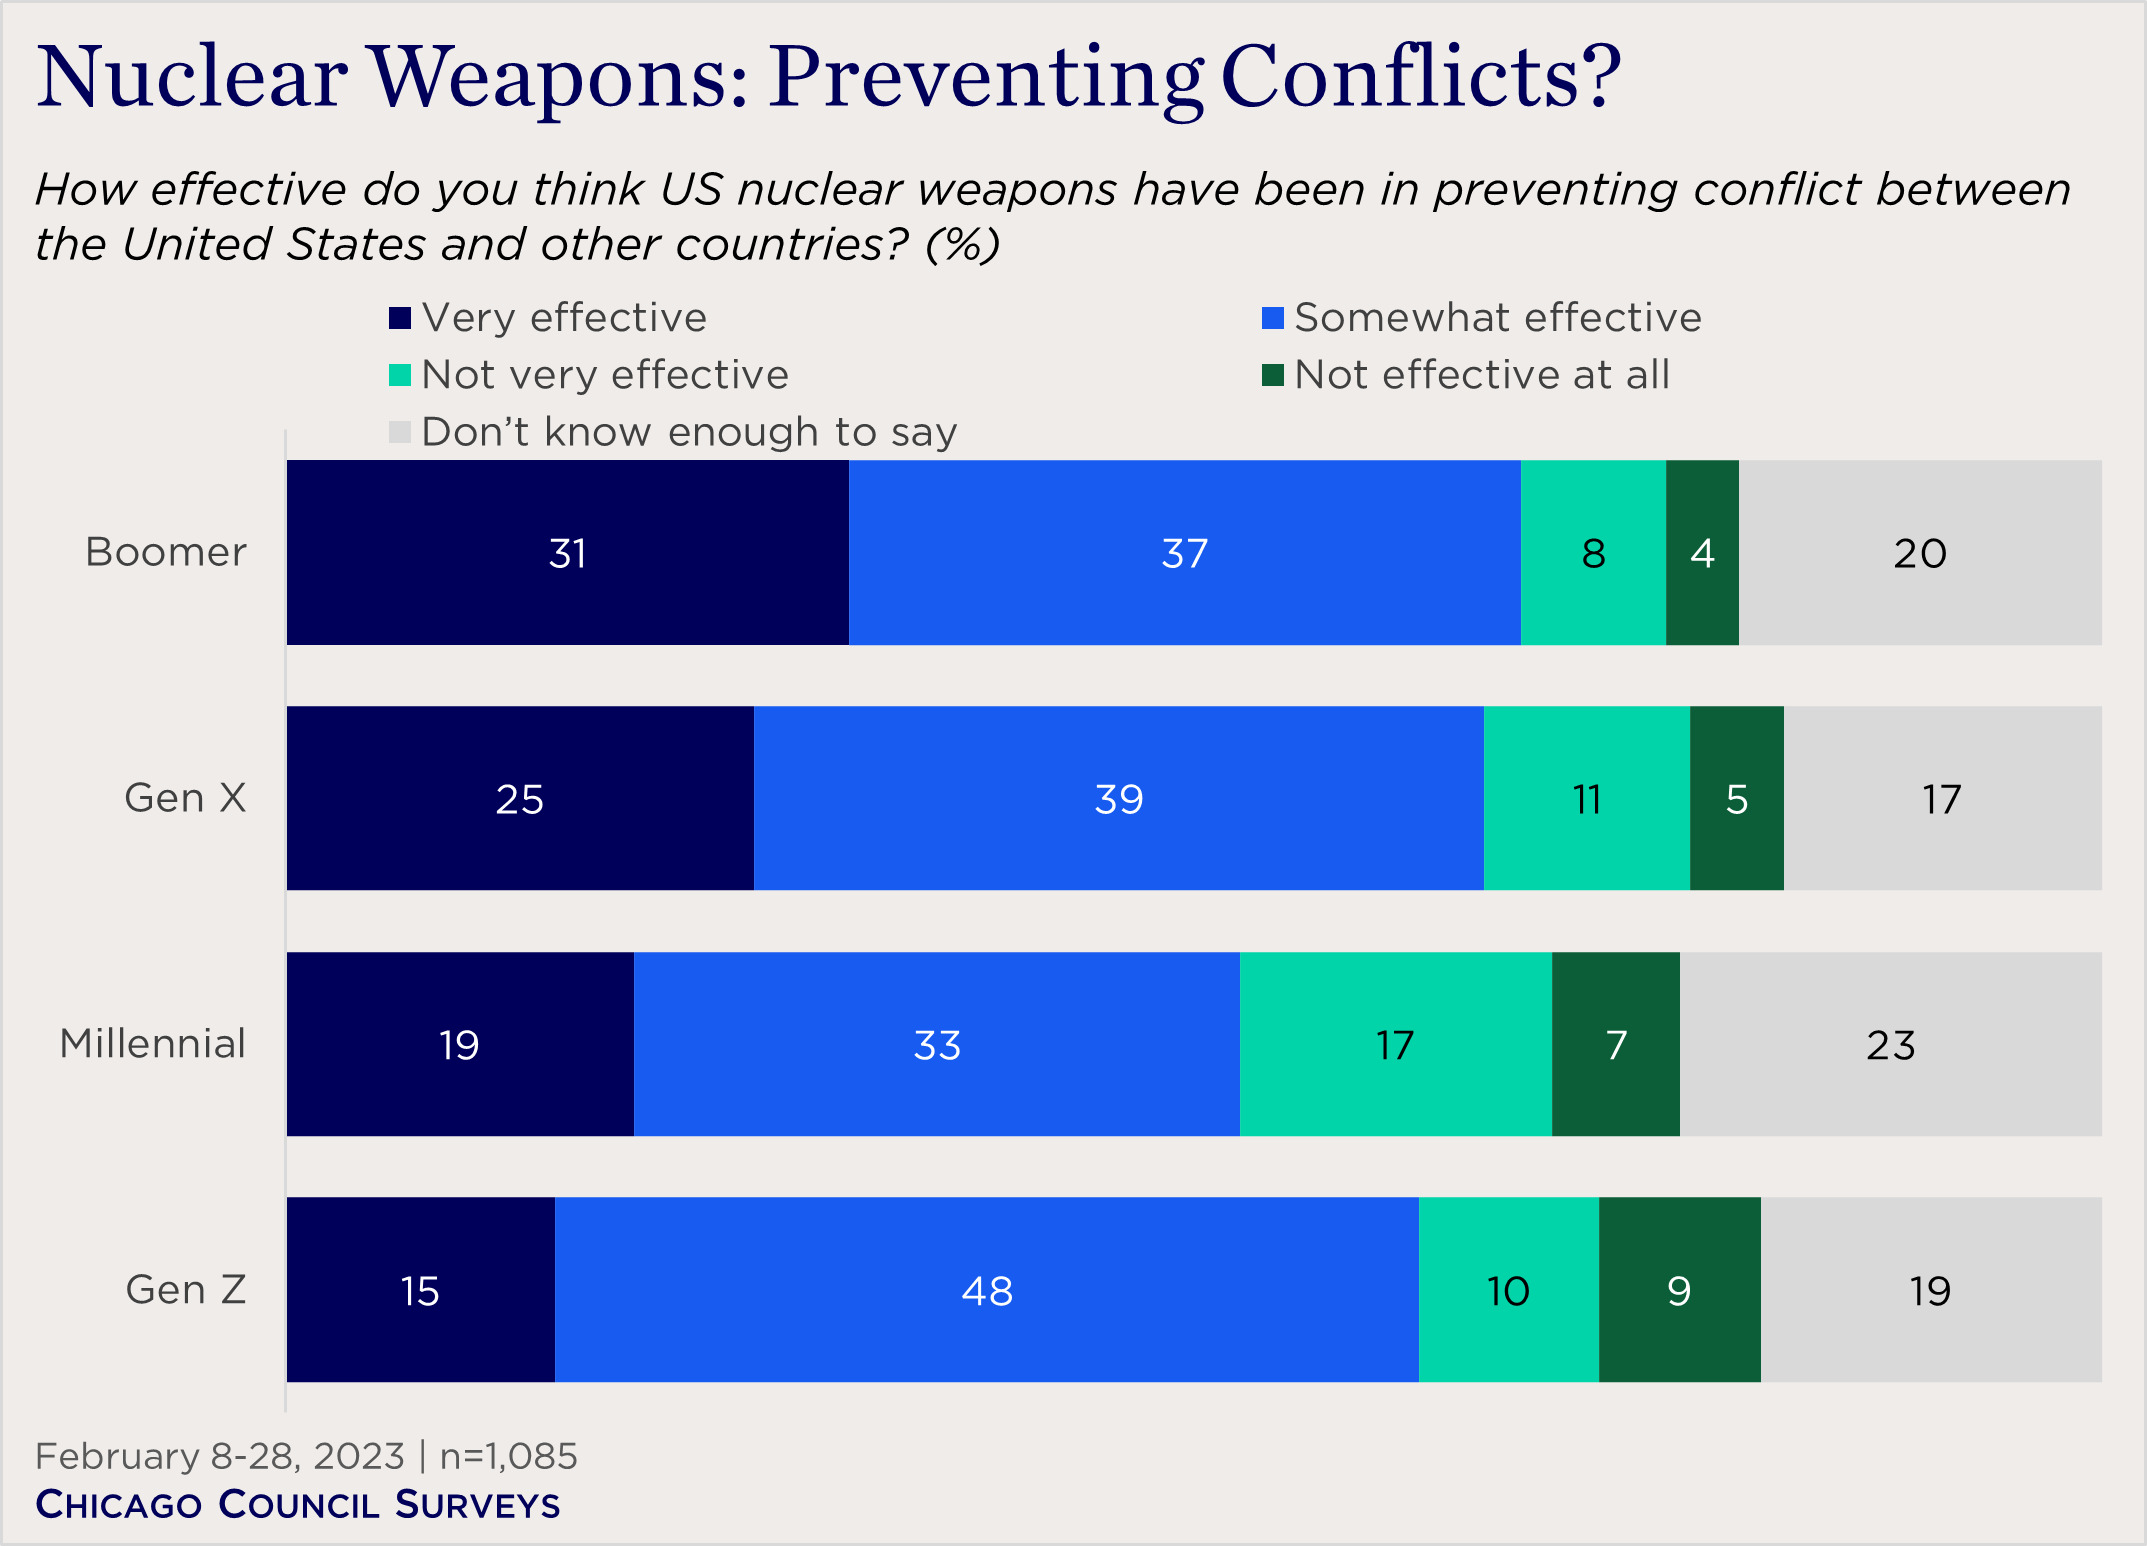 "bar chart showing generational views on whether nuclear weapons are effective in preventing conflicts"